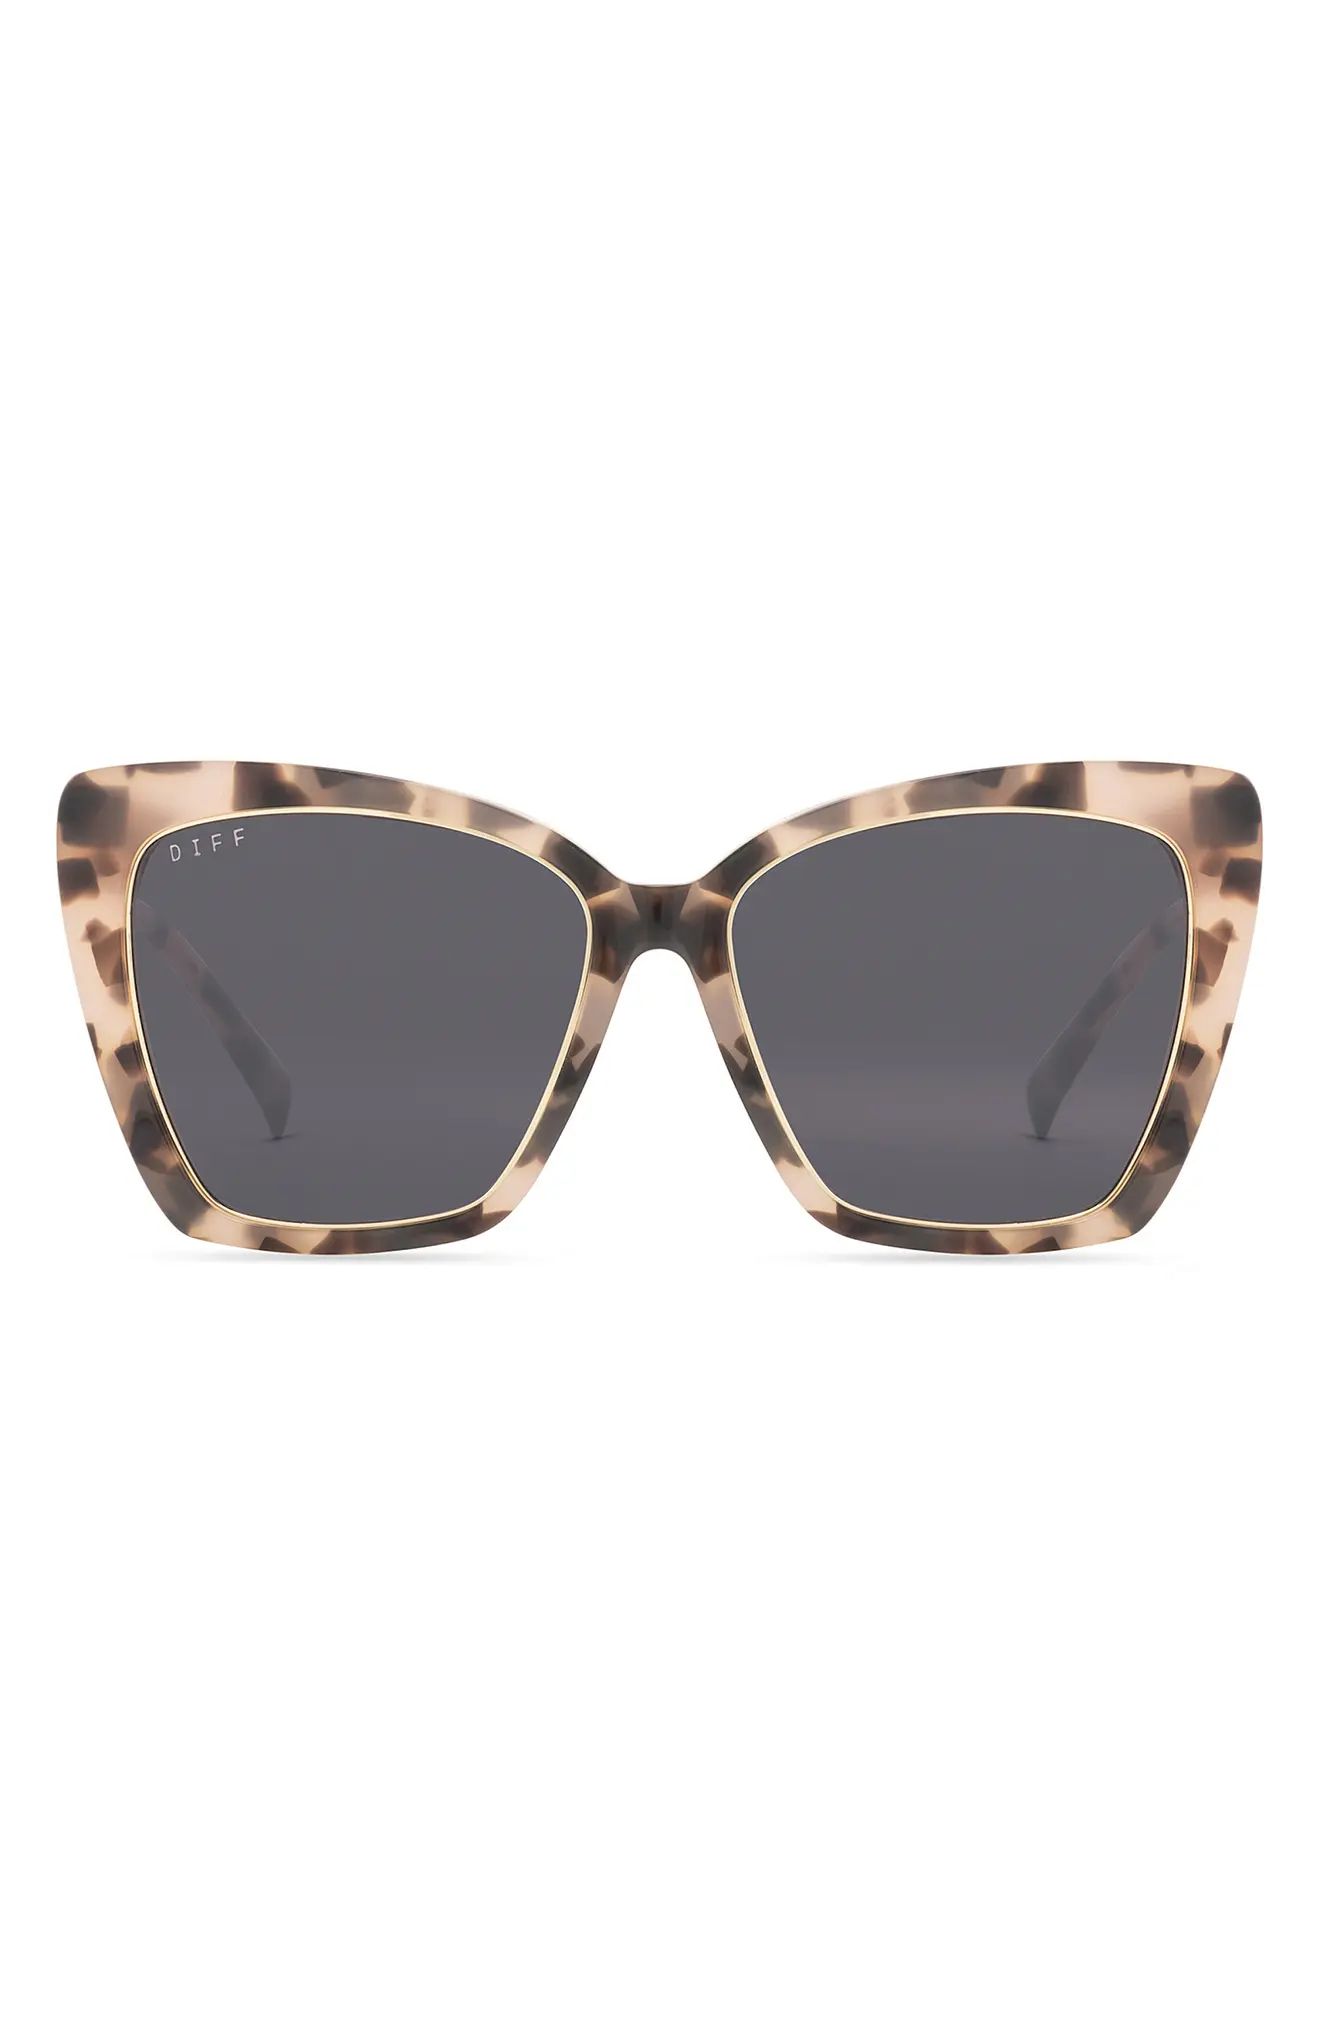 DIFF Becky IV 56mm Polarized Cat Eye Sunglasses in Himalayan Tort /Grey at Nordstrom | Nordstrom